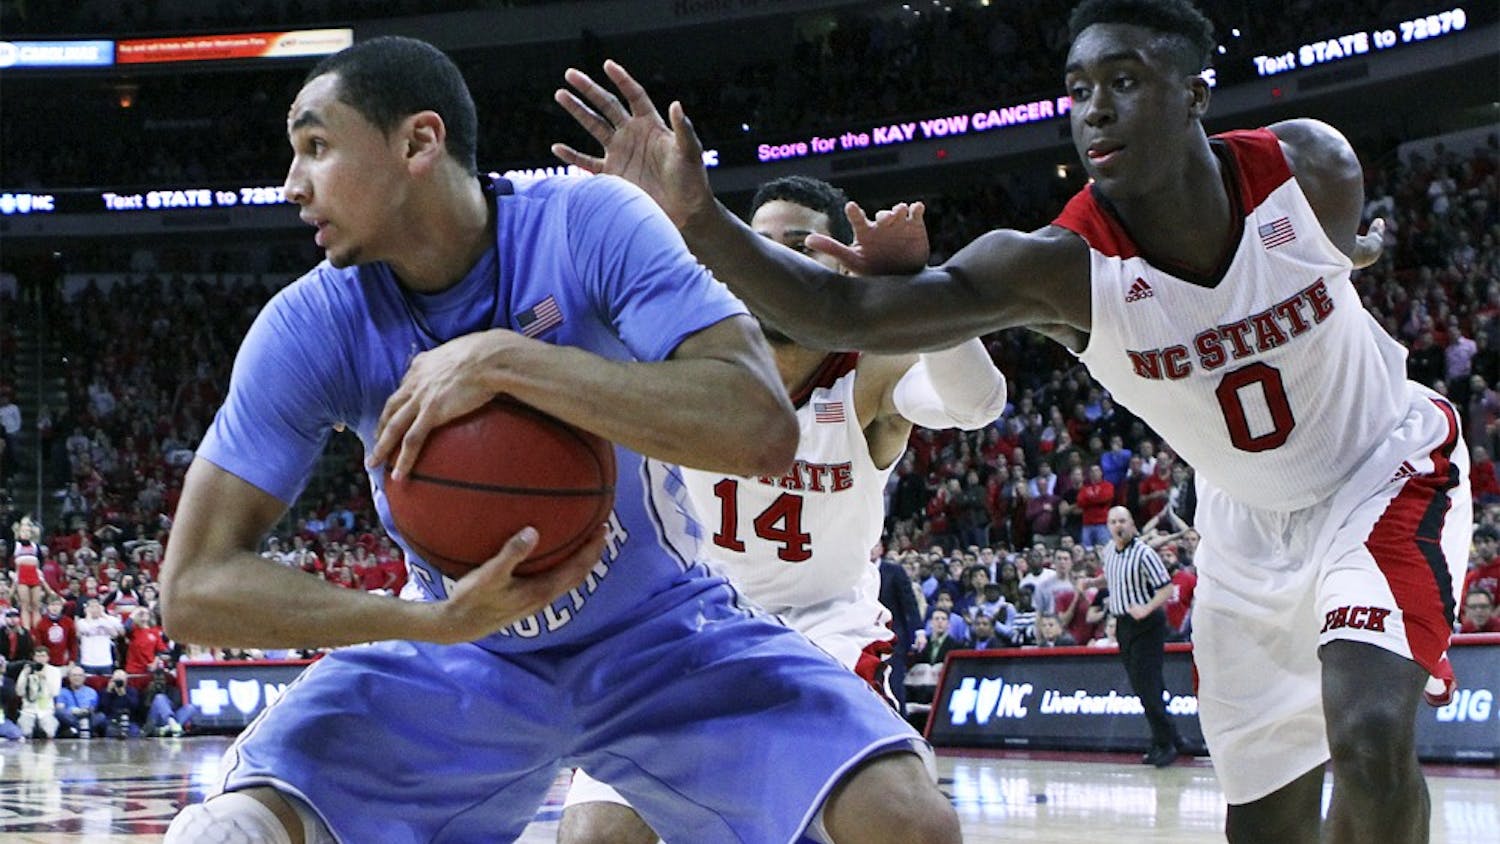 Junior point guard Marcus Paige holds onto a pass off an inbounds play against N.C. State’s Abdul-Malik Abu during No. 15 UNC’s 81-79 victory over the Wolfpack on Wednesday night at PNC Arena in Raleigh. 